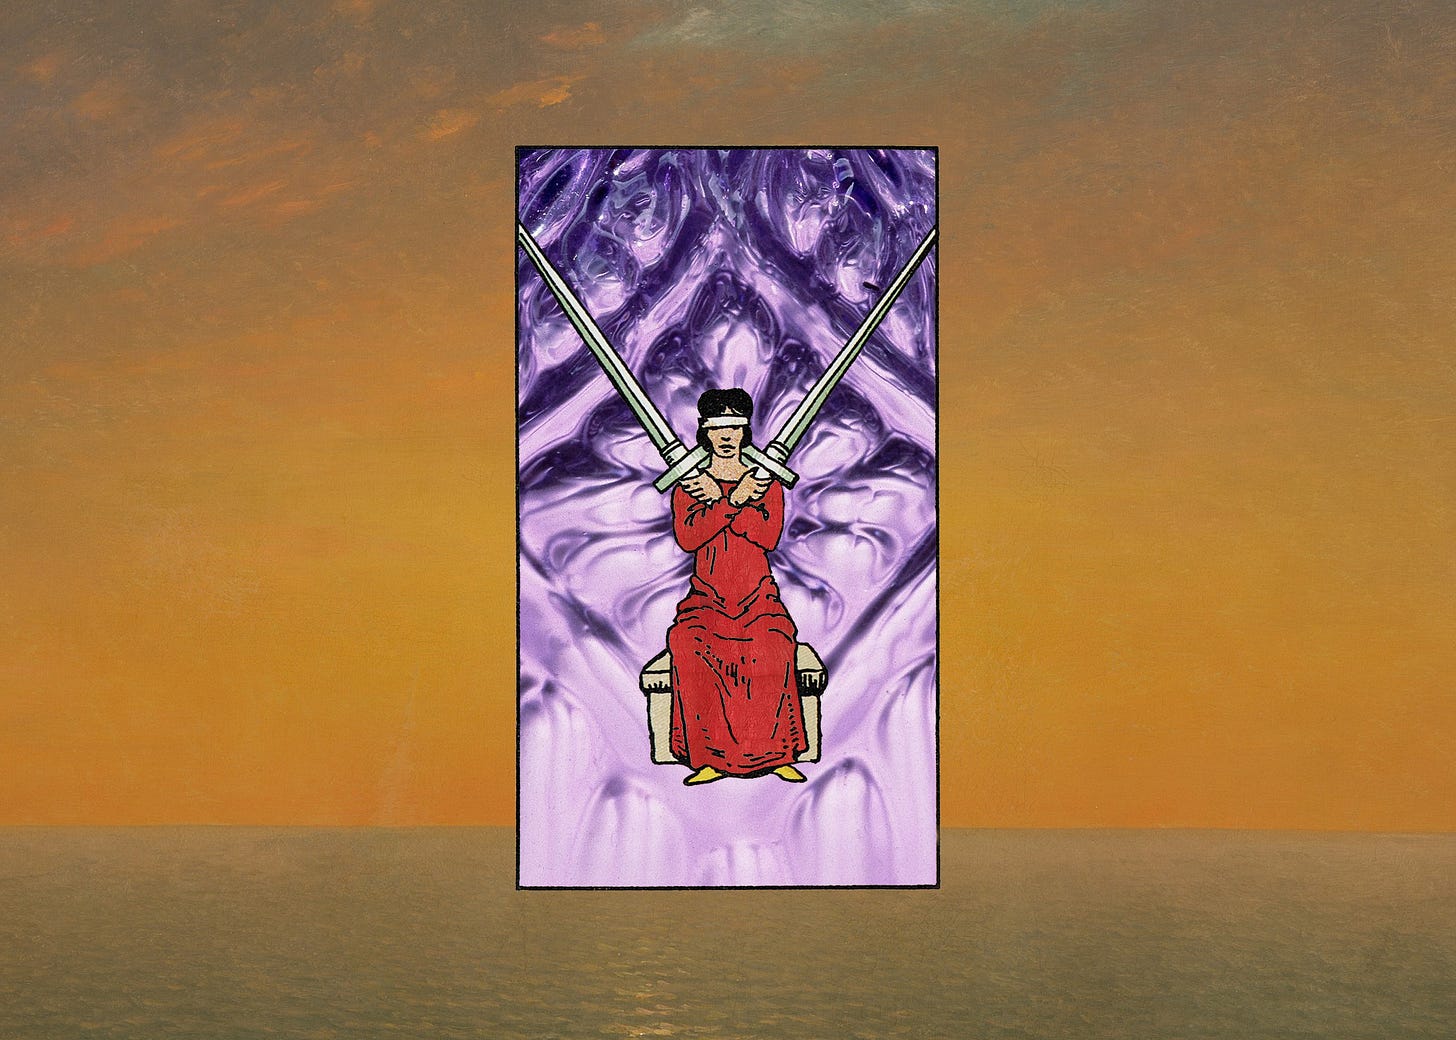 A painting of a sunset over the ocean has the two of swords tarot card on it, which is set on a background of stained glass and materials